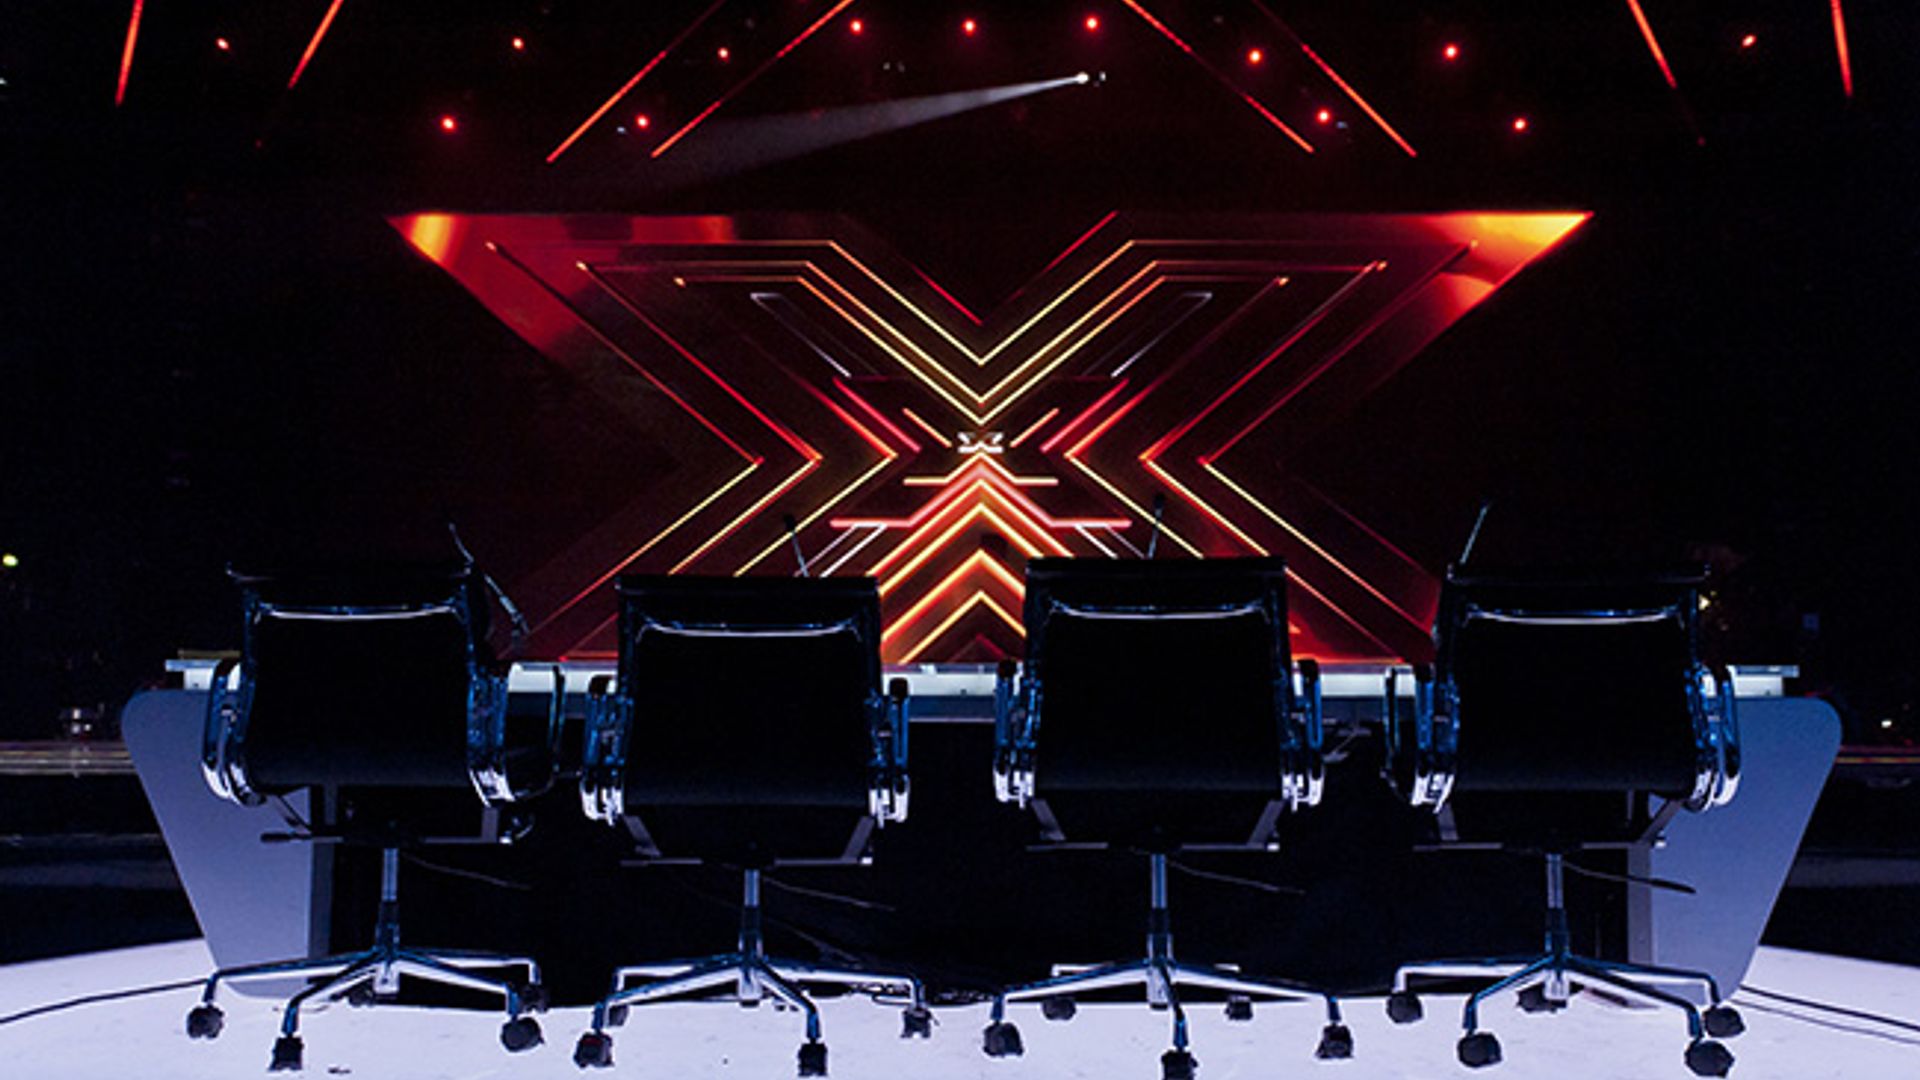 xfactor chairs 